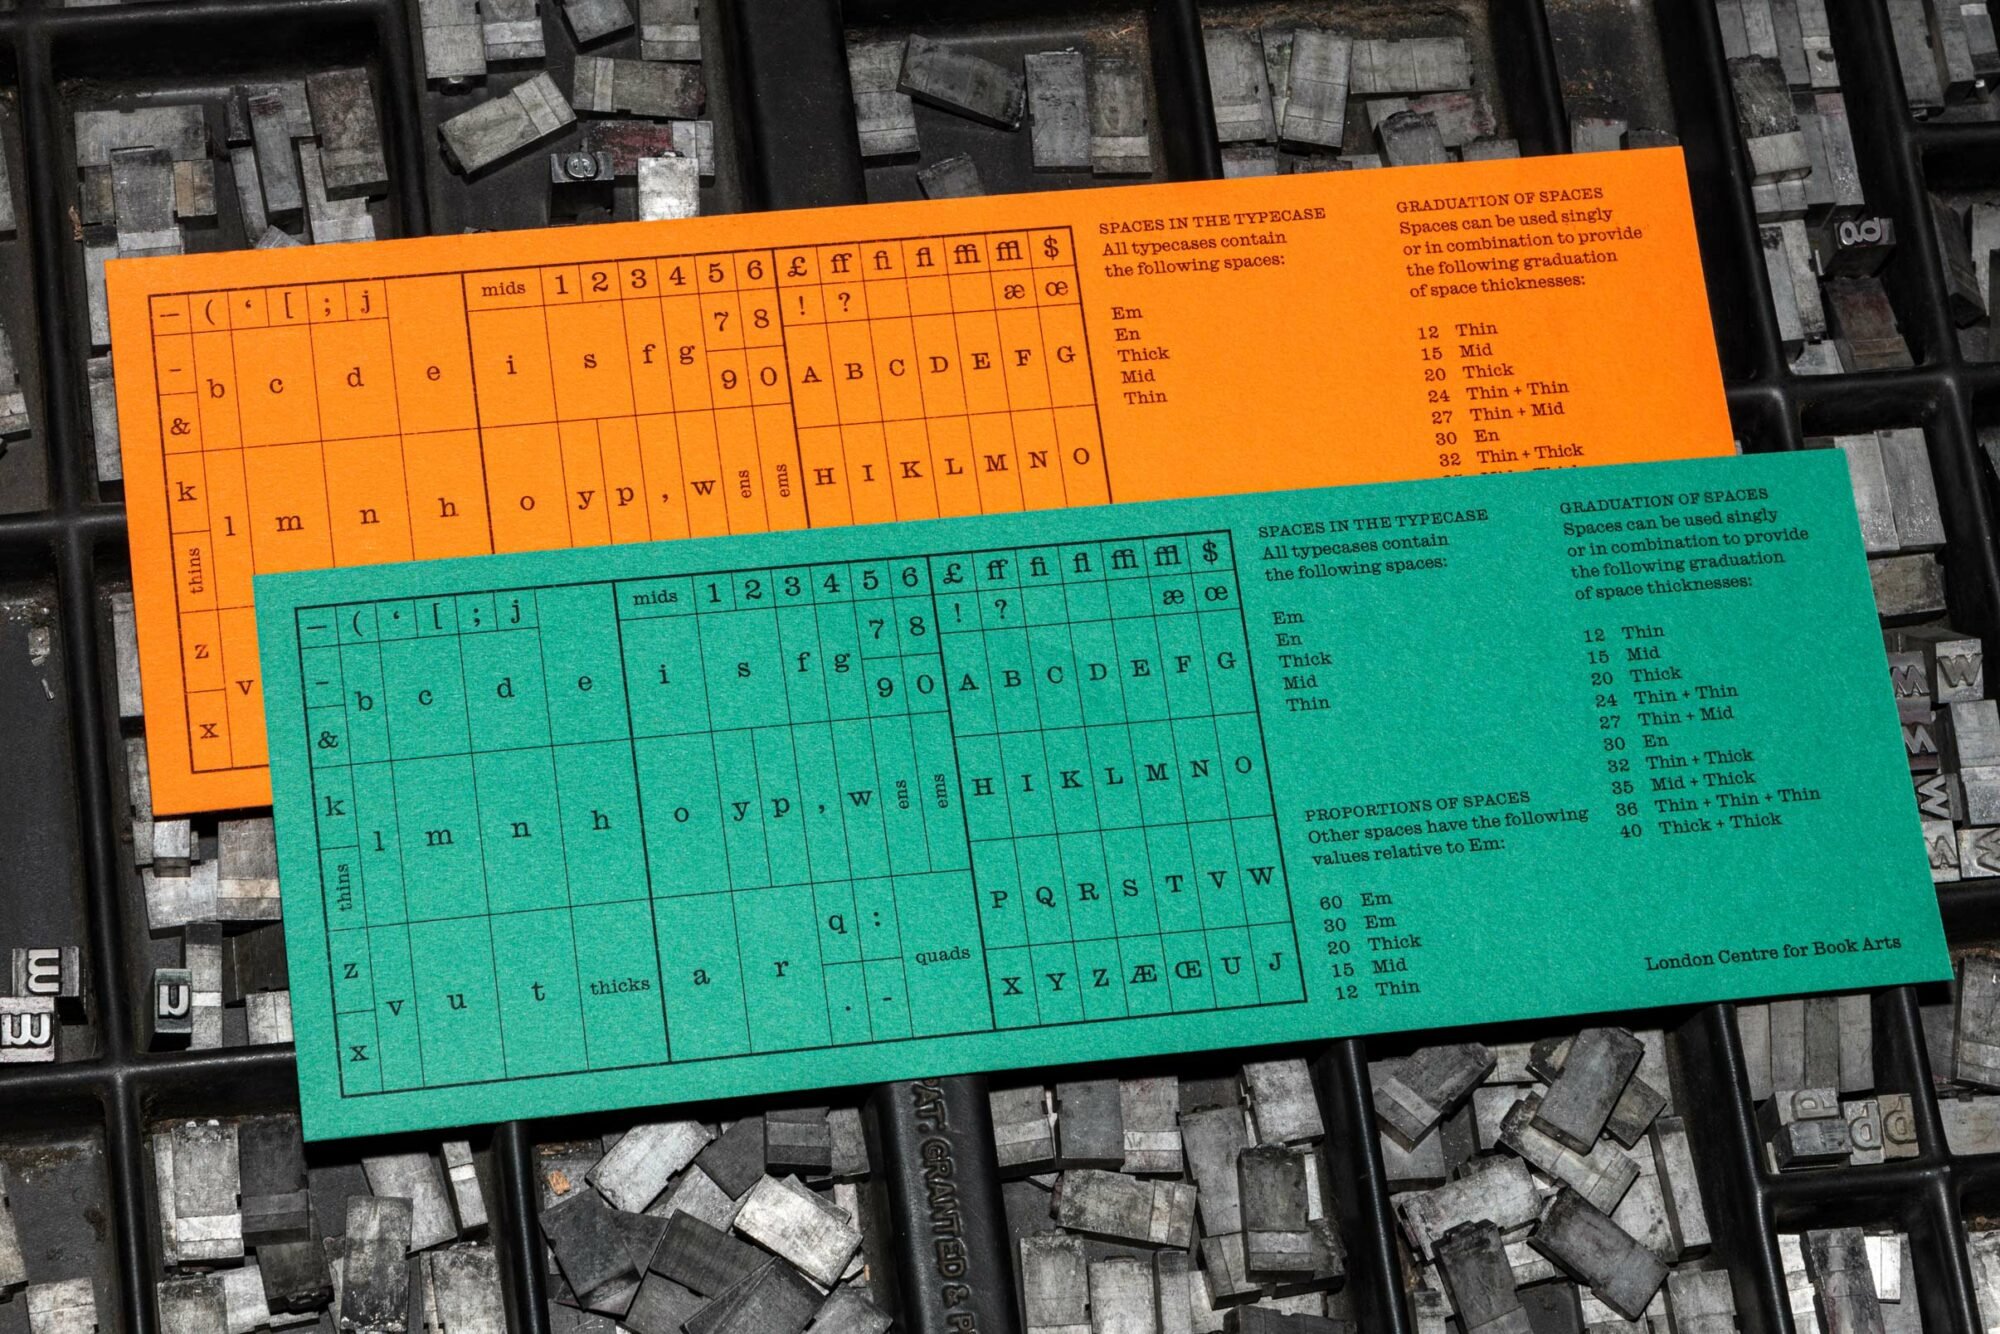 Green and orange print for the London Centre for Book Arts designed by Studio Bergini